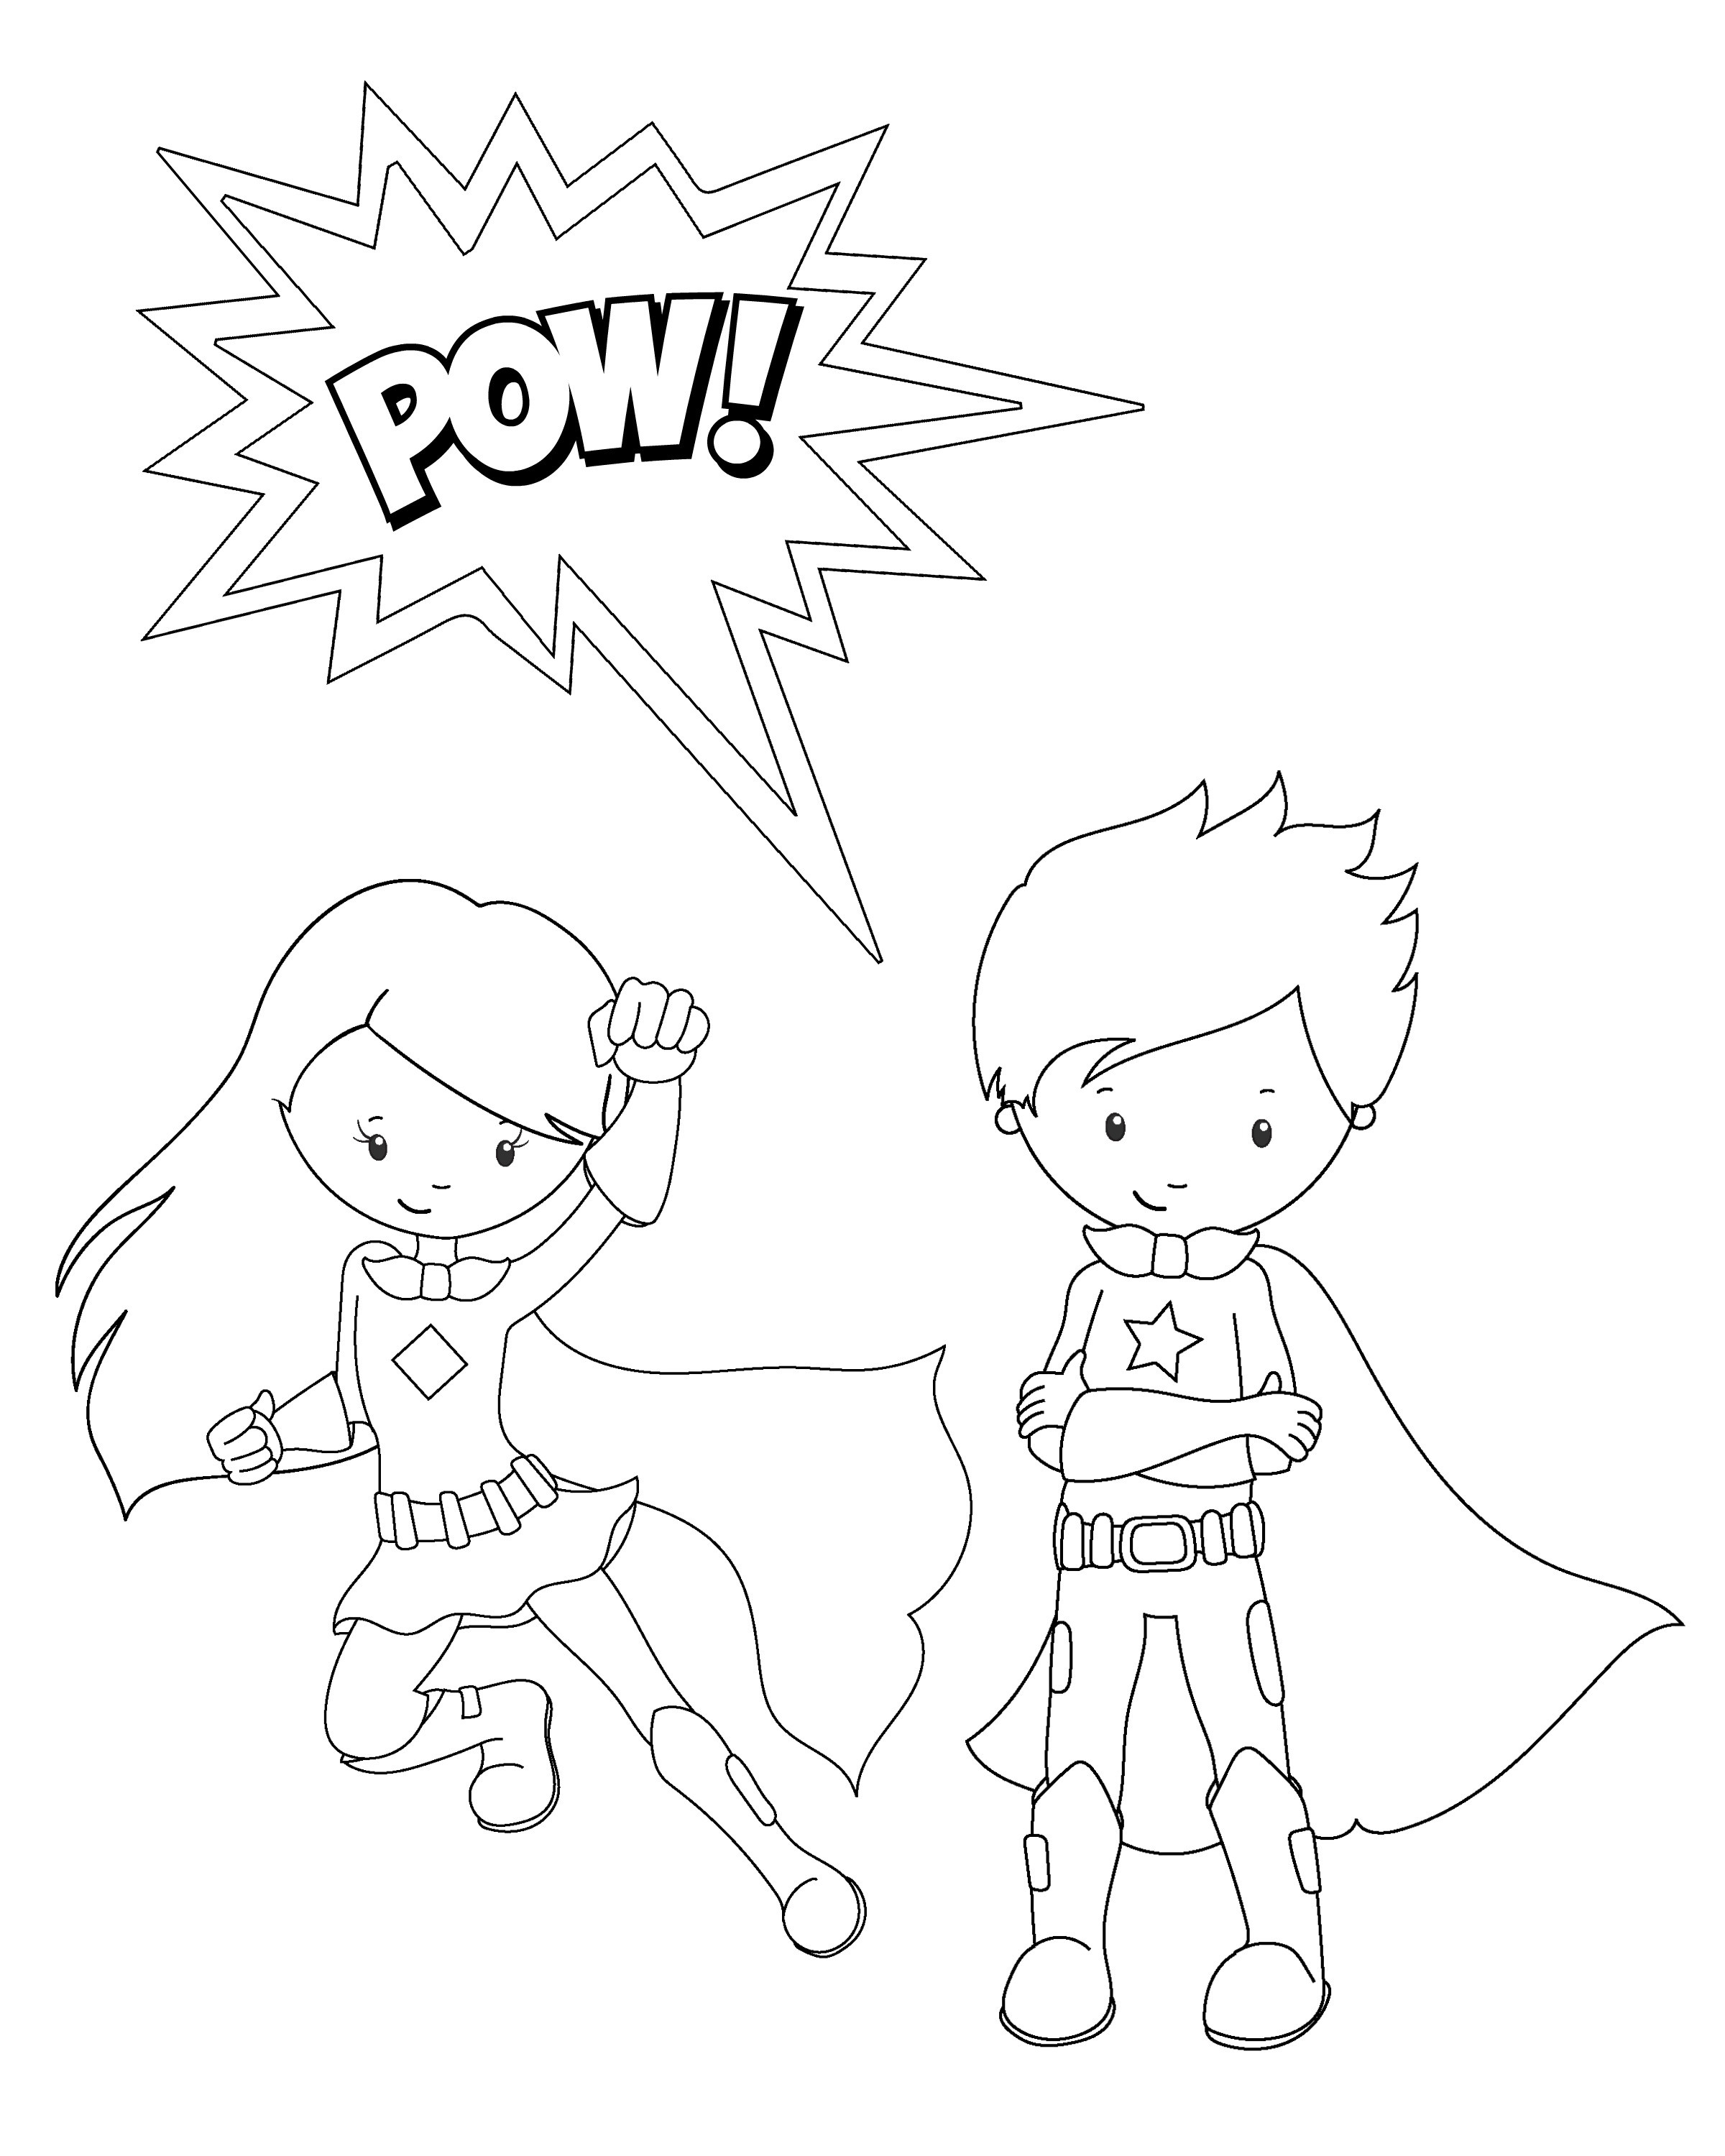 Superhero Boys Coloring Pages
 Free Printable Superhero Coloring Sheets for Kids Crazy